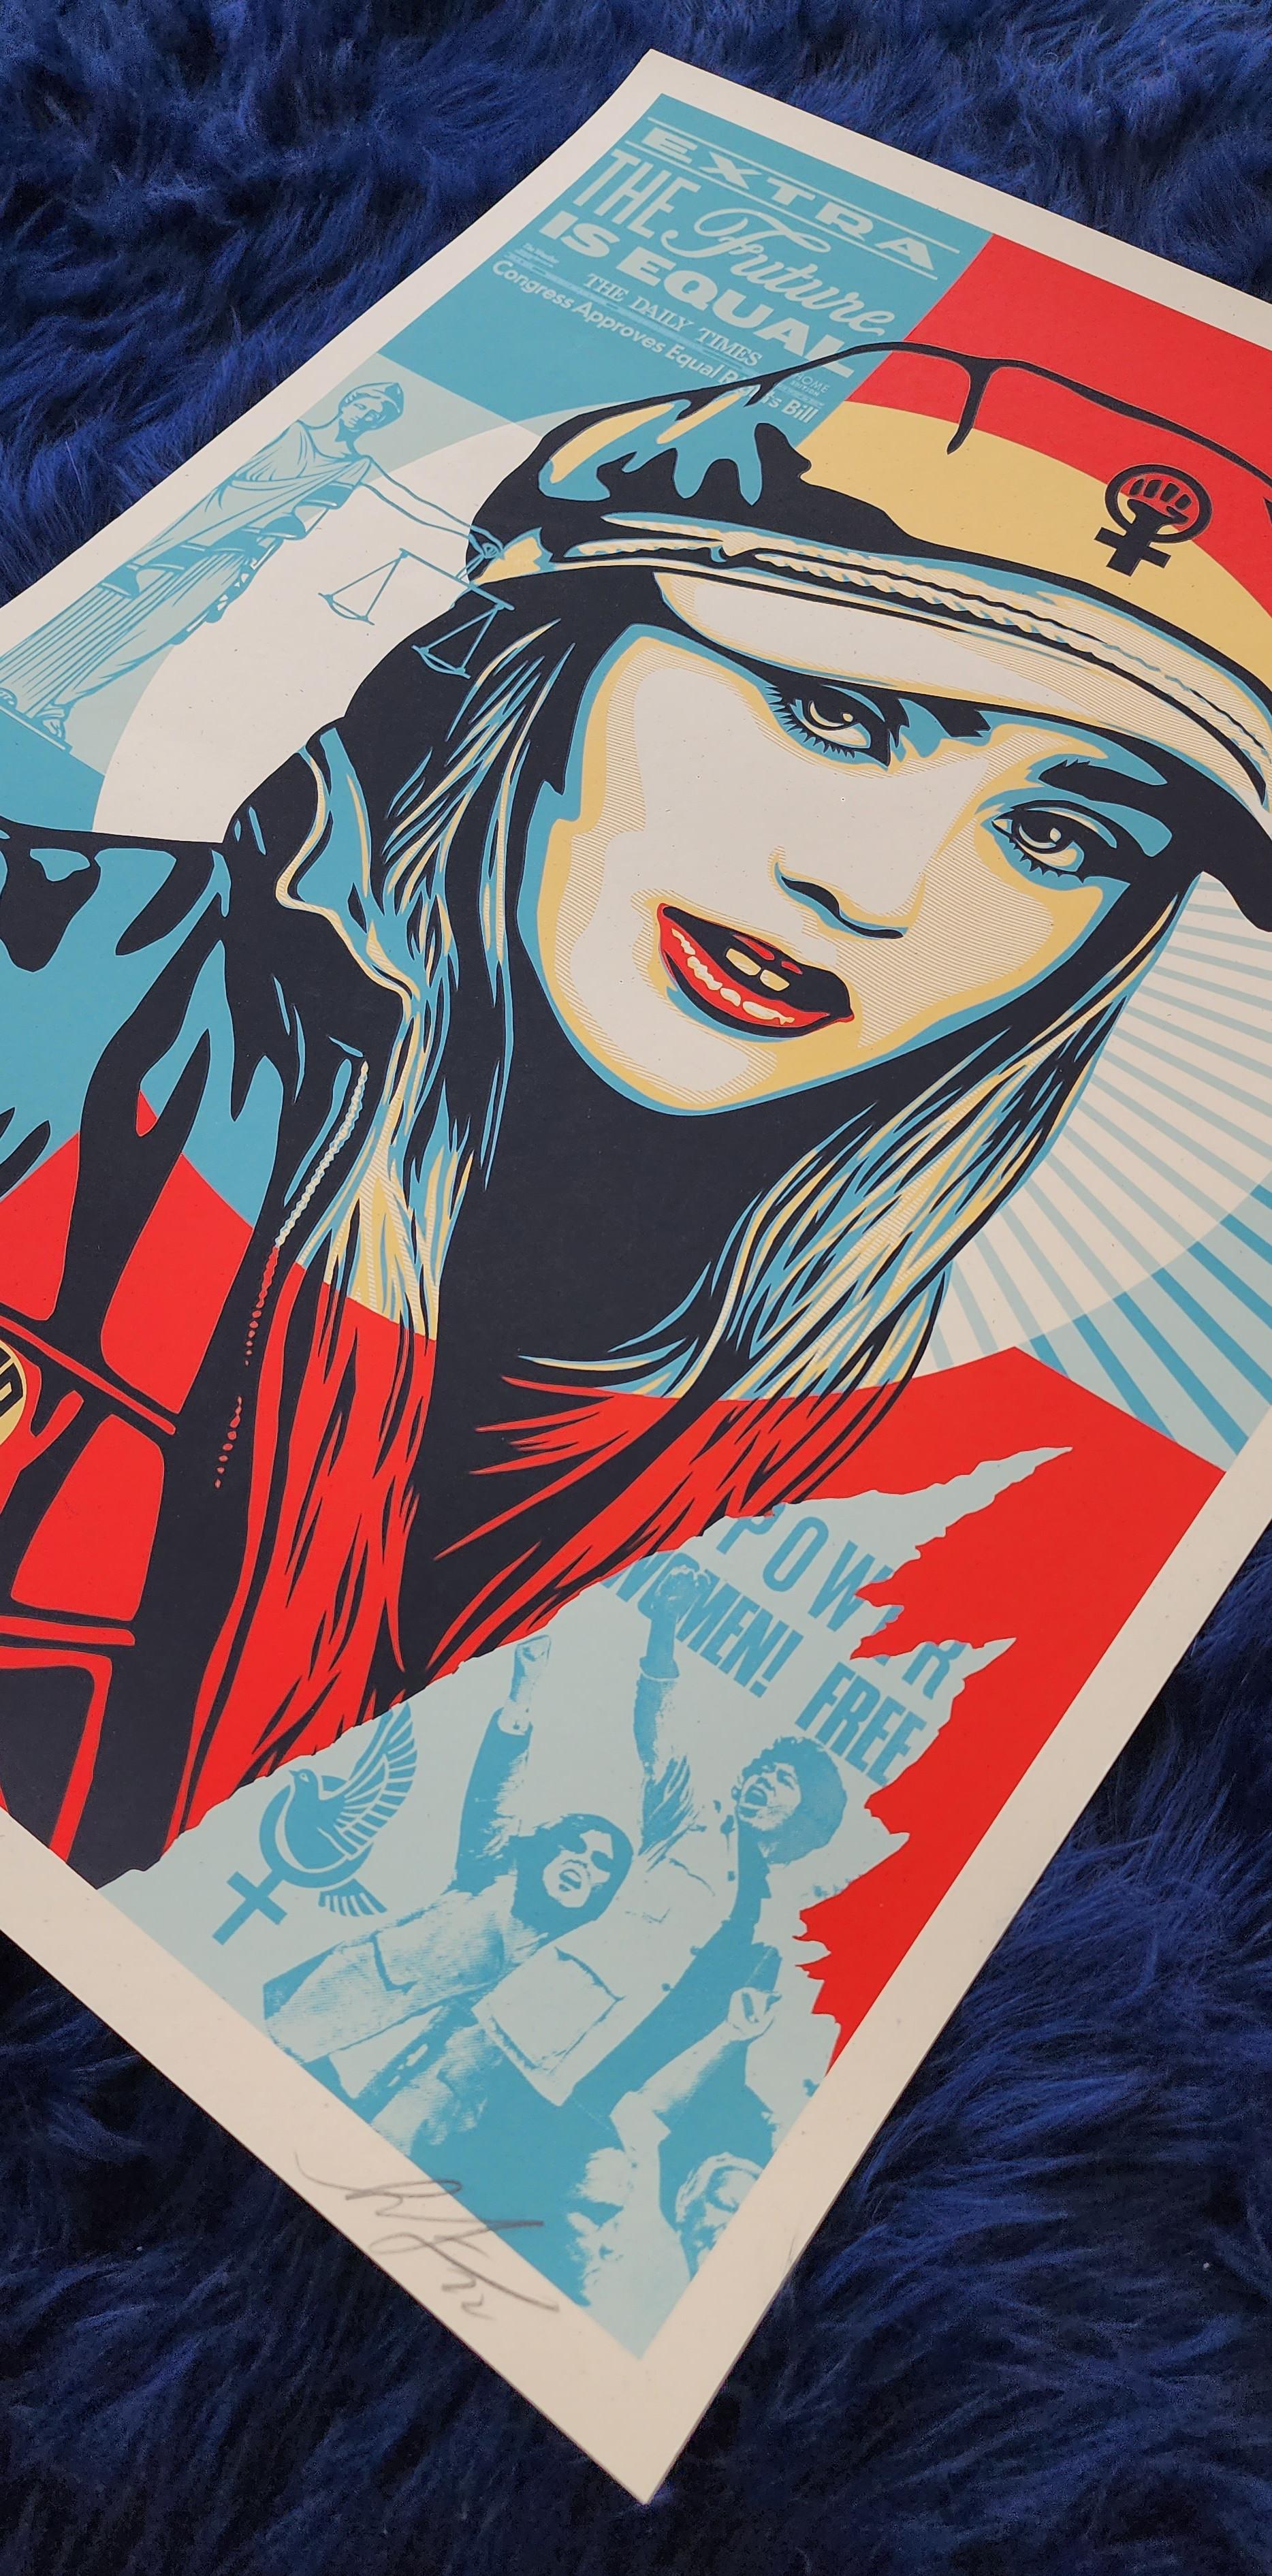 The Future Is Equal (Iconic, ERA, women’s rights, gender equality) - Beige Portrait Print by Shepard Fairey